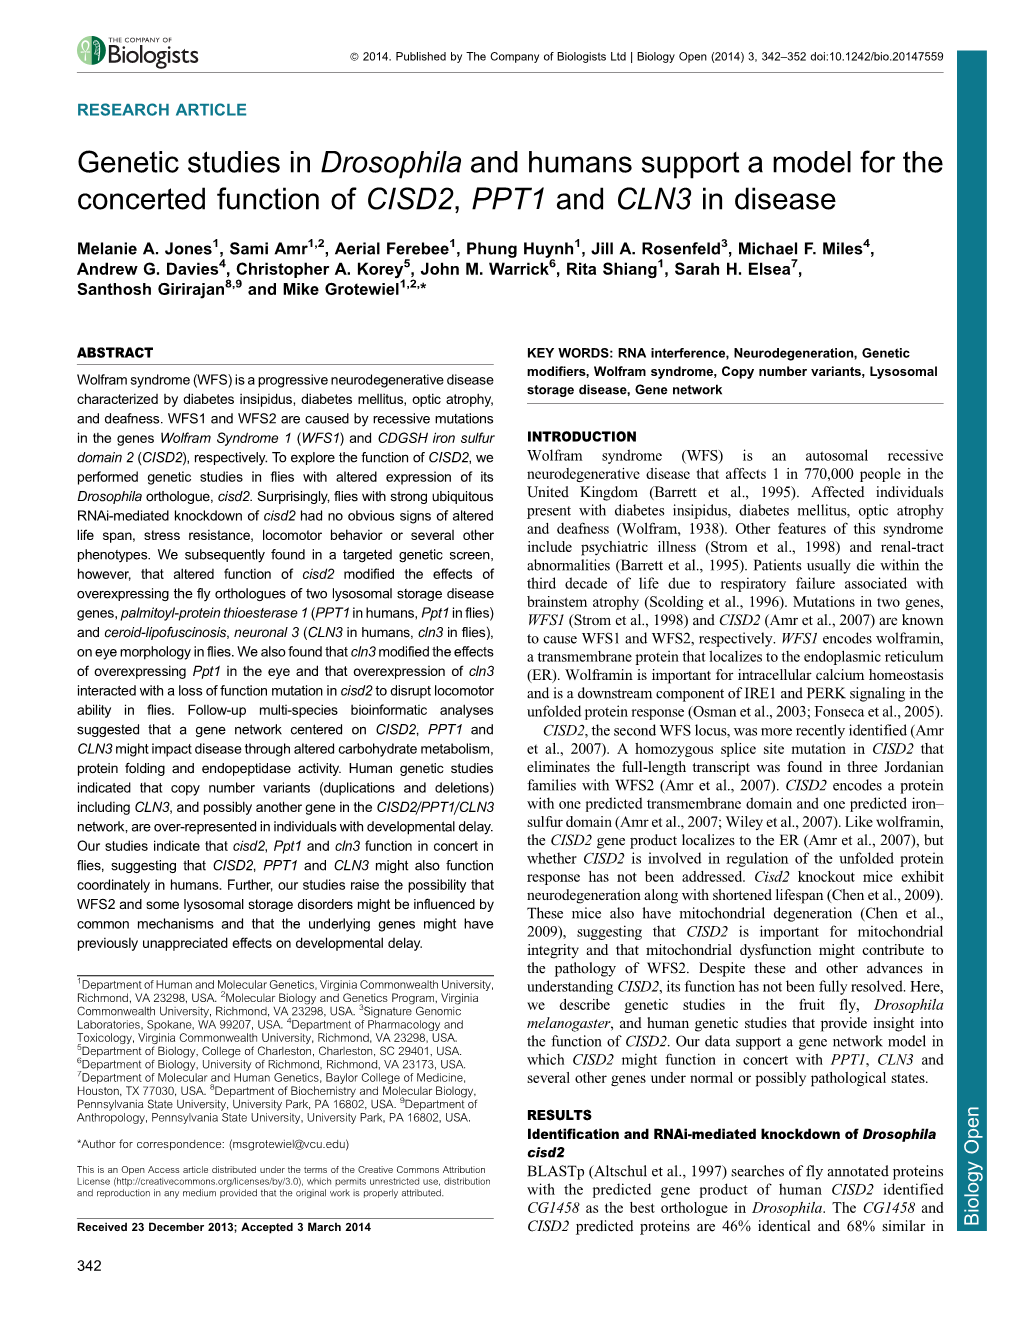 Genetic Studies in Drosophila and Humans Support a Model for the Concerted Function of CISD2, PPT1 and CLN3 in Disease